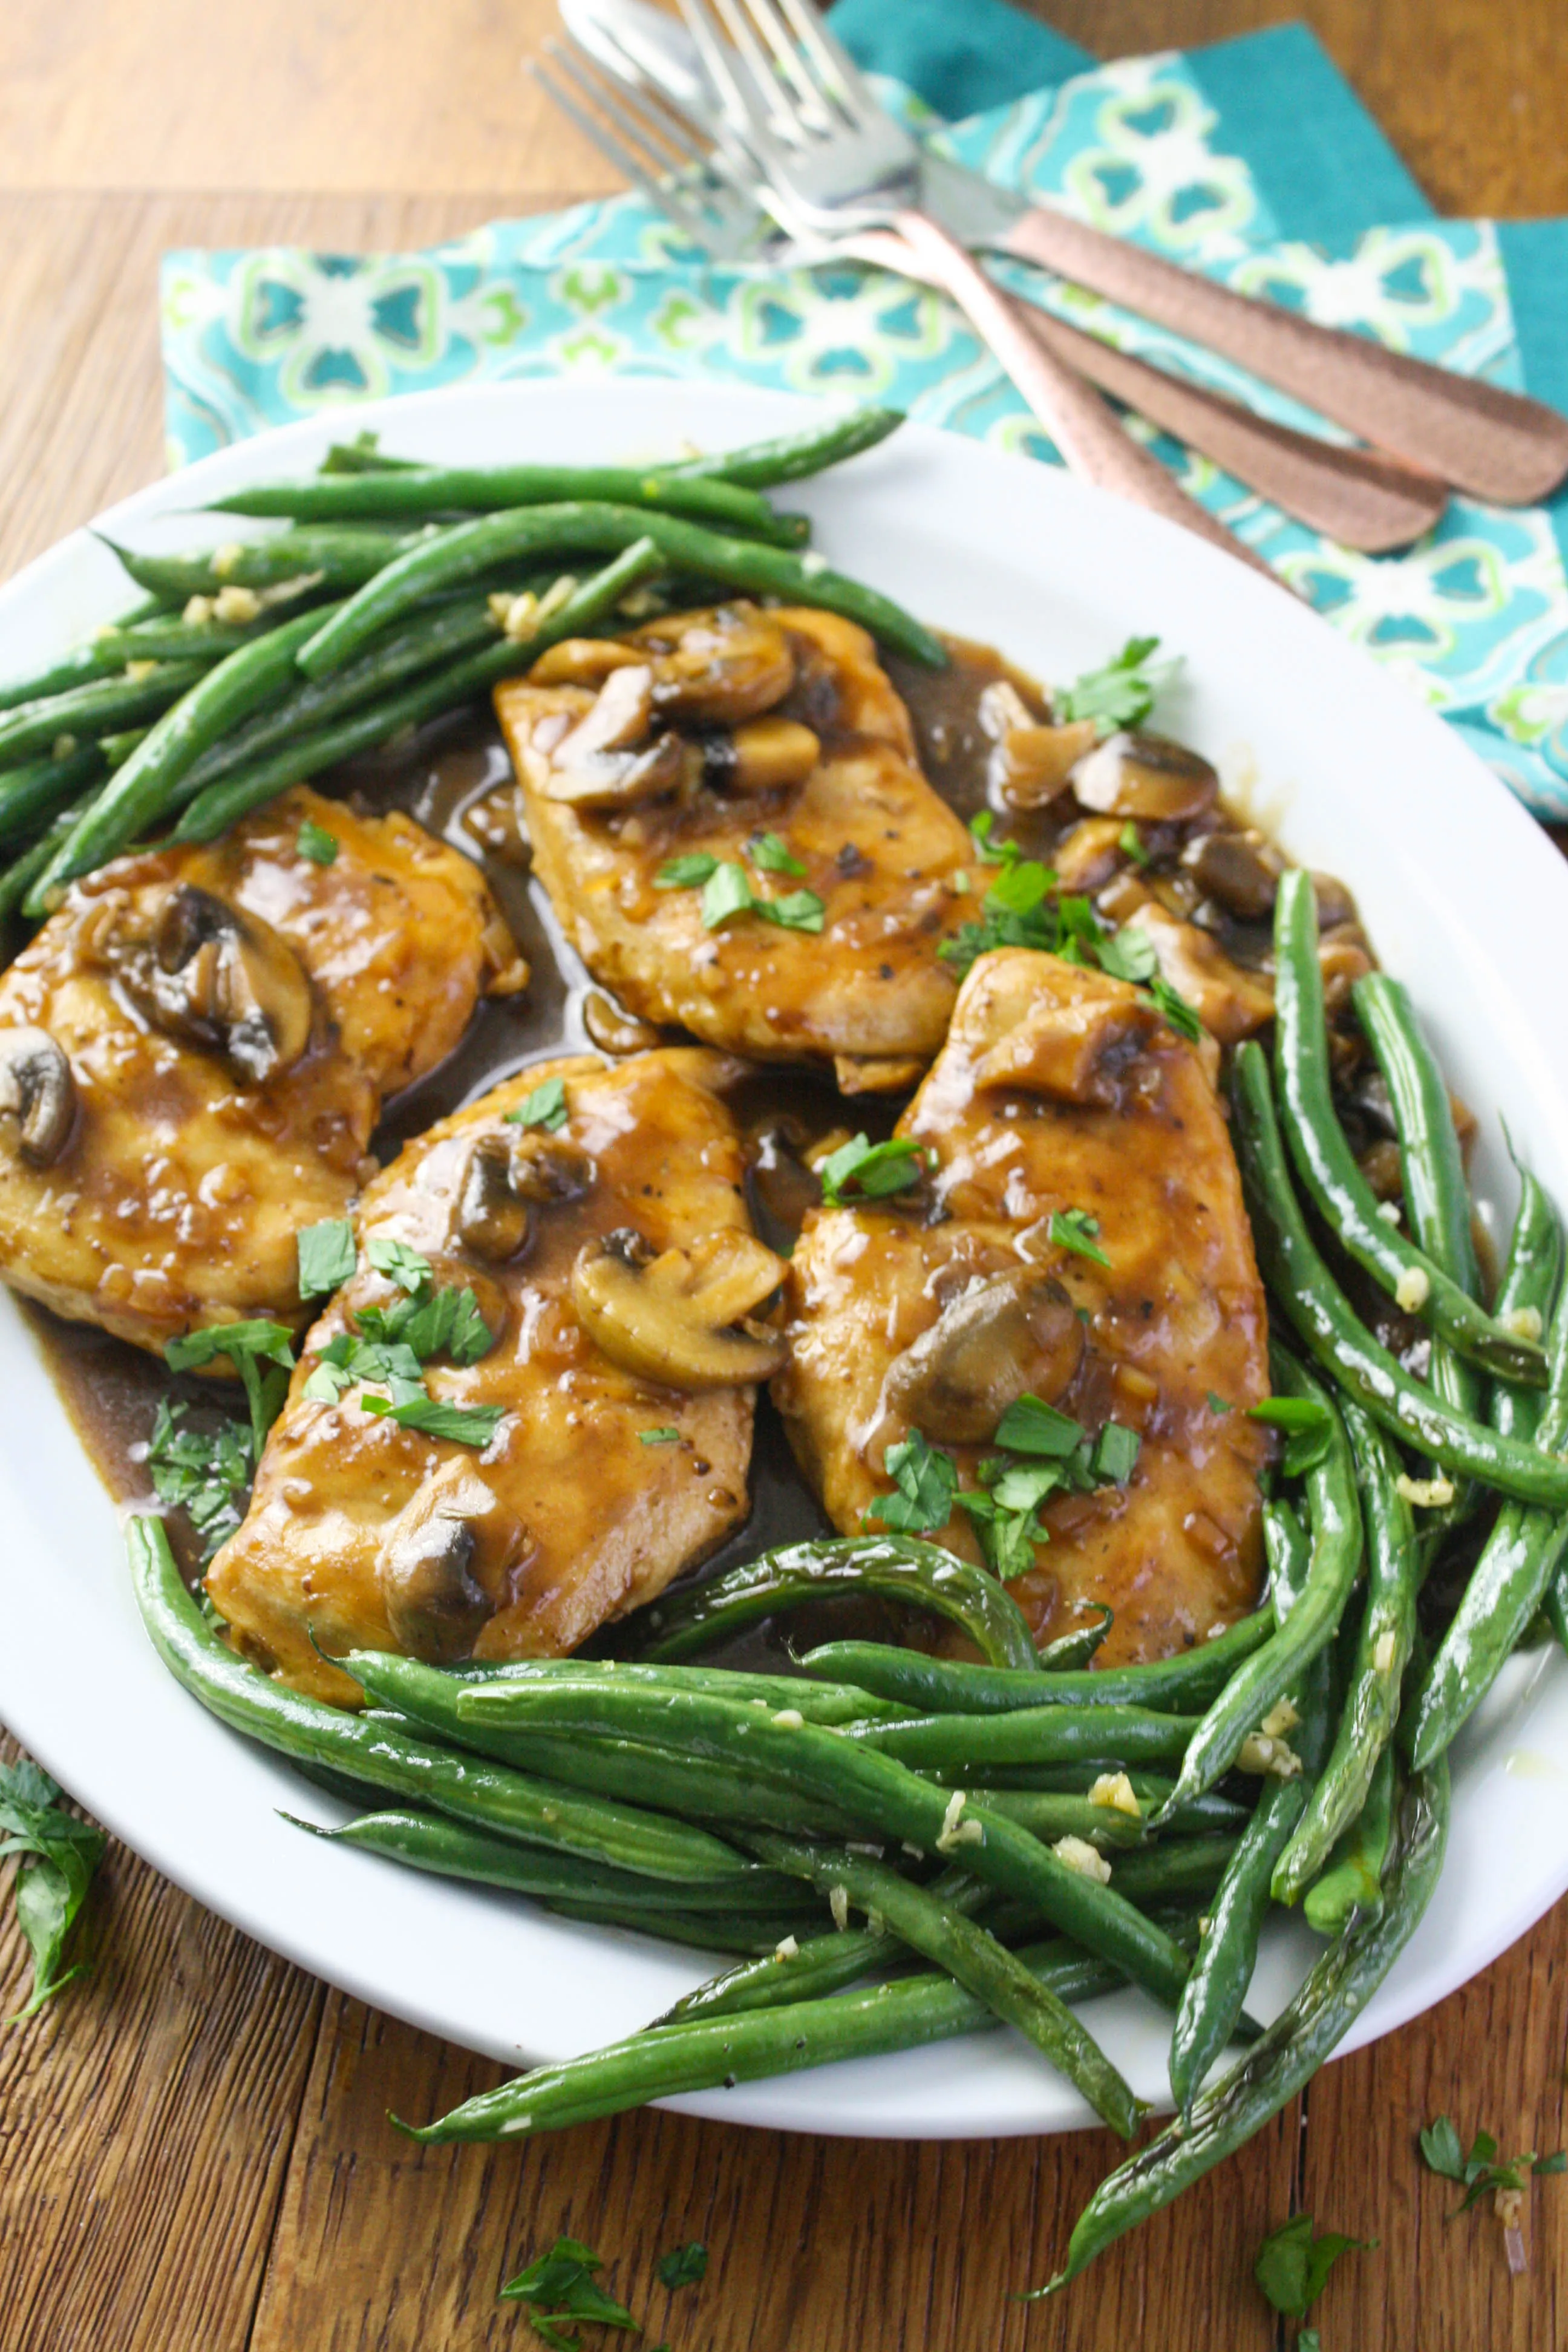 Chicken Madeira is saucy, rich and flavorful. This chicken dish makes a lovely meal with its rich flavors.